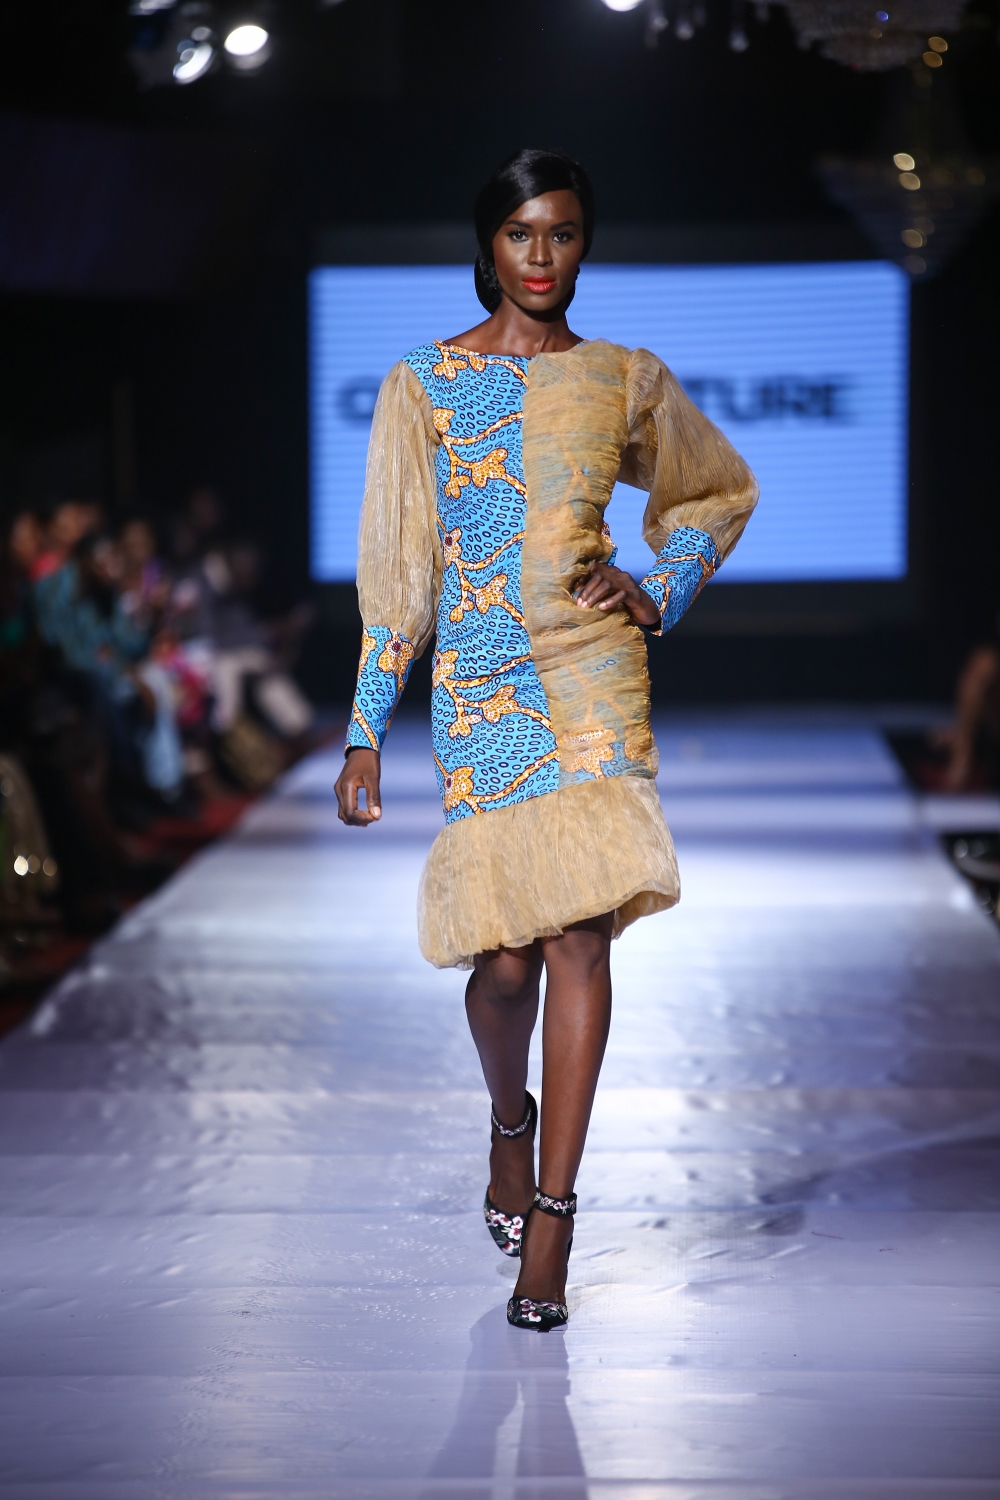 #AFWN17 | Africa Fashion Week Nigeria Day 1: Oma Couture 